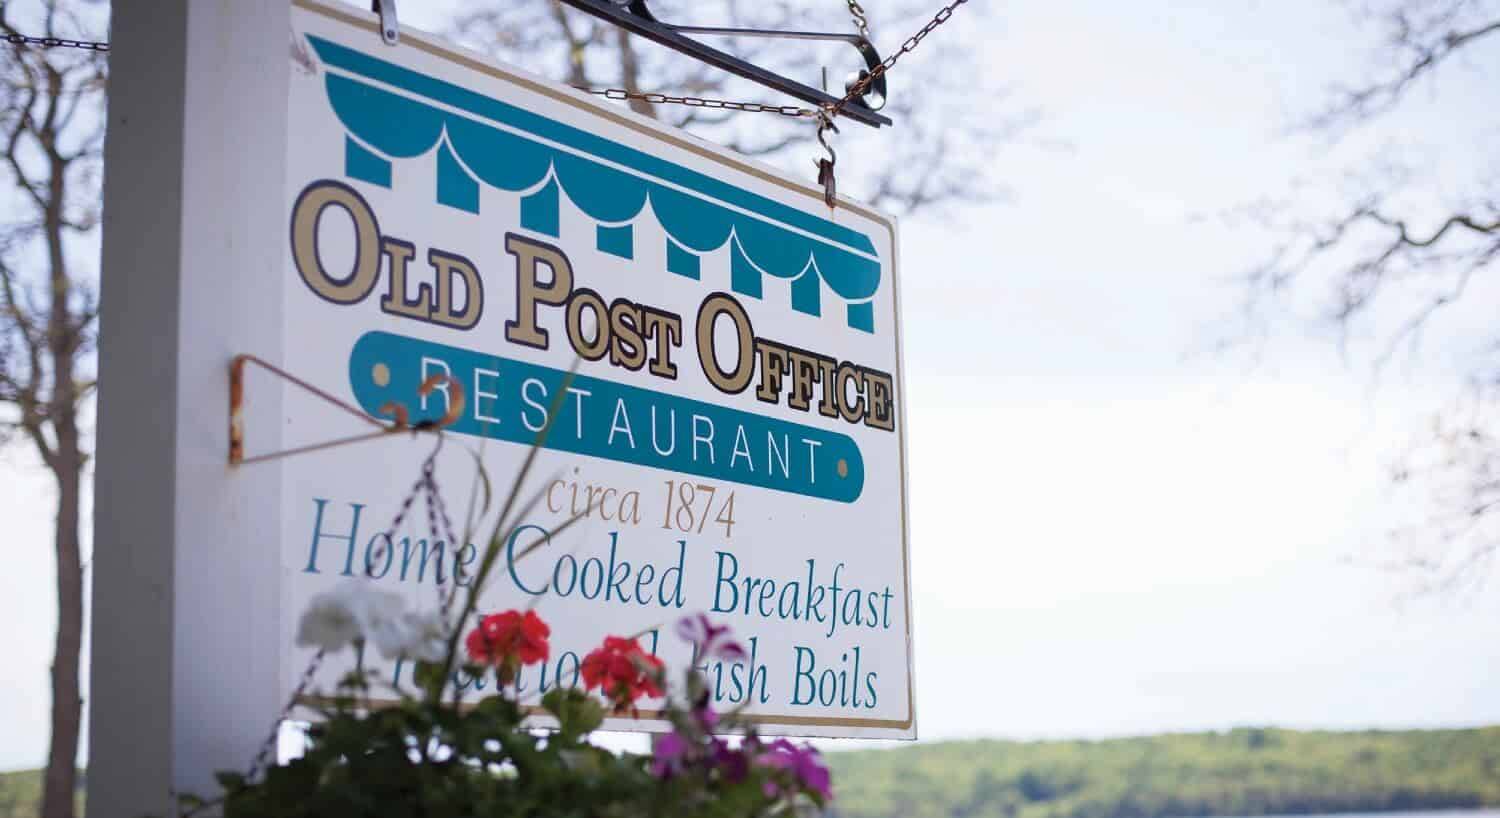 White and blue business sign for a restaurant built in 1875, marketing home cooked breakfast